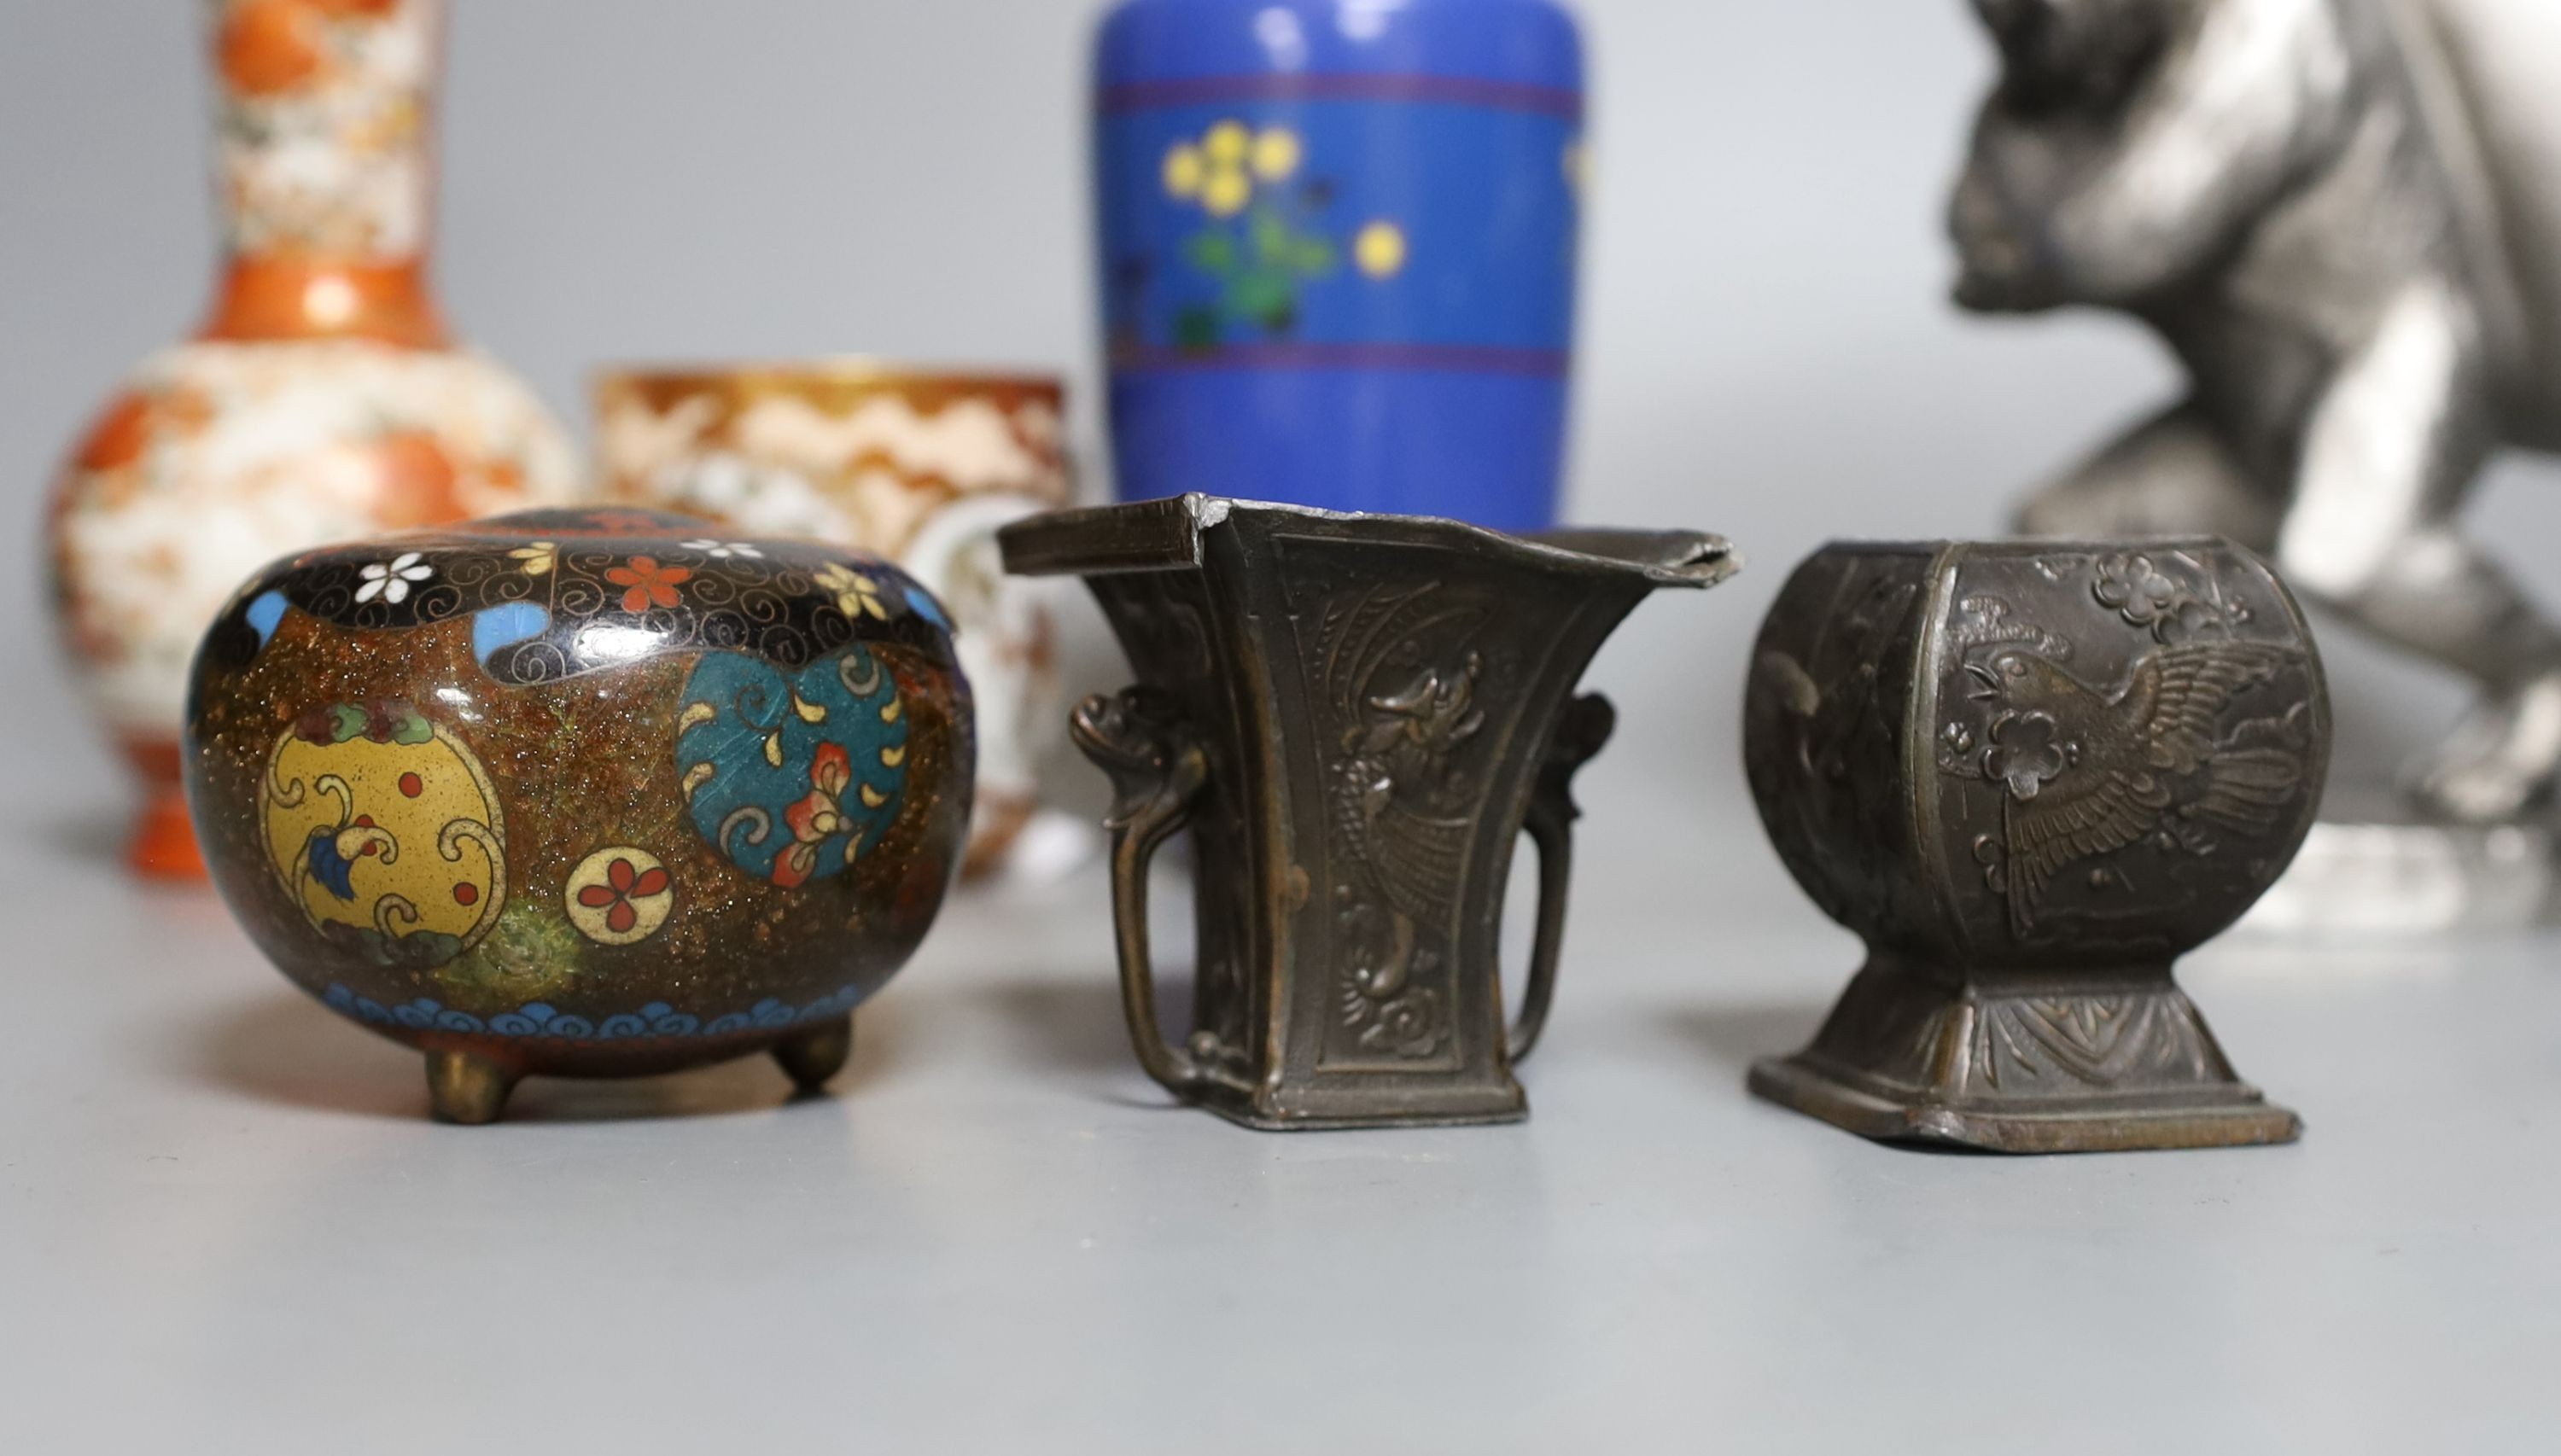 A selection of Japanese ceramics, bronzes and cloisonné enamel wares - some Meiji period